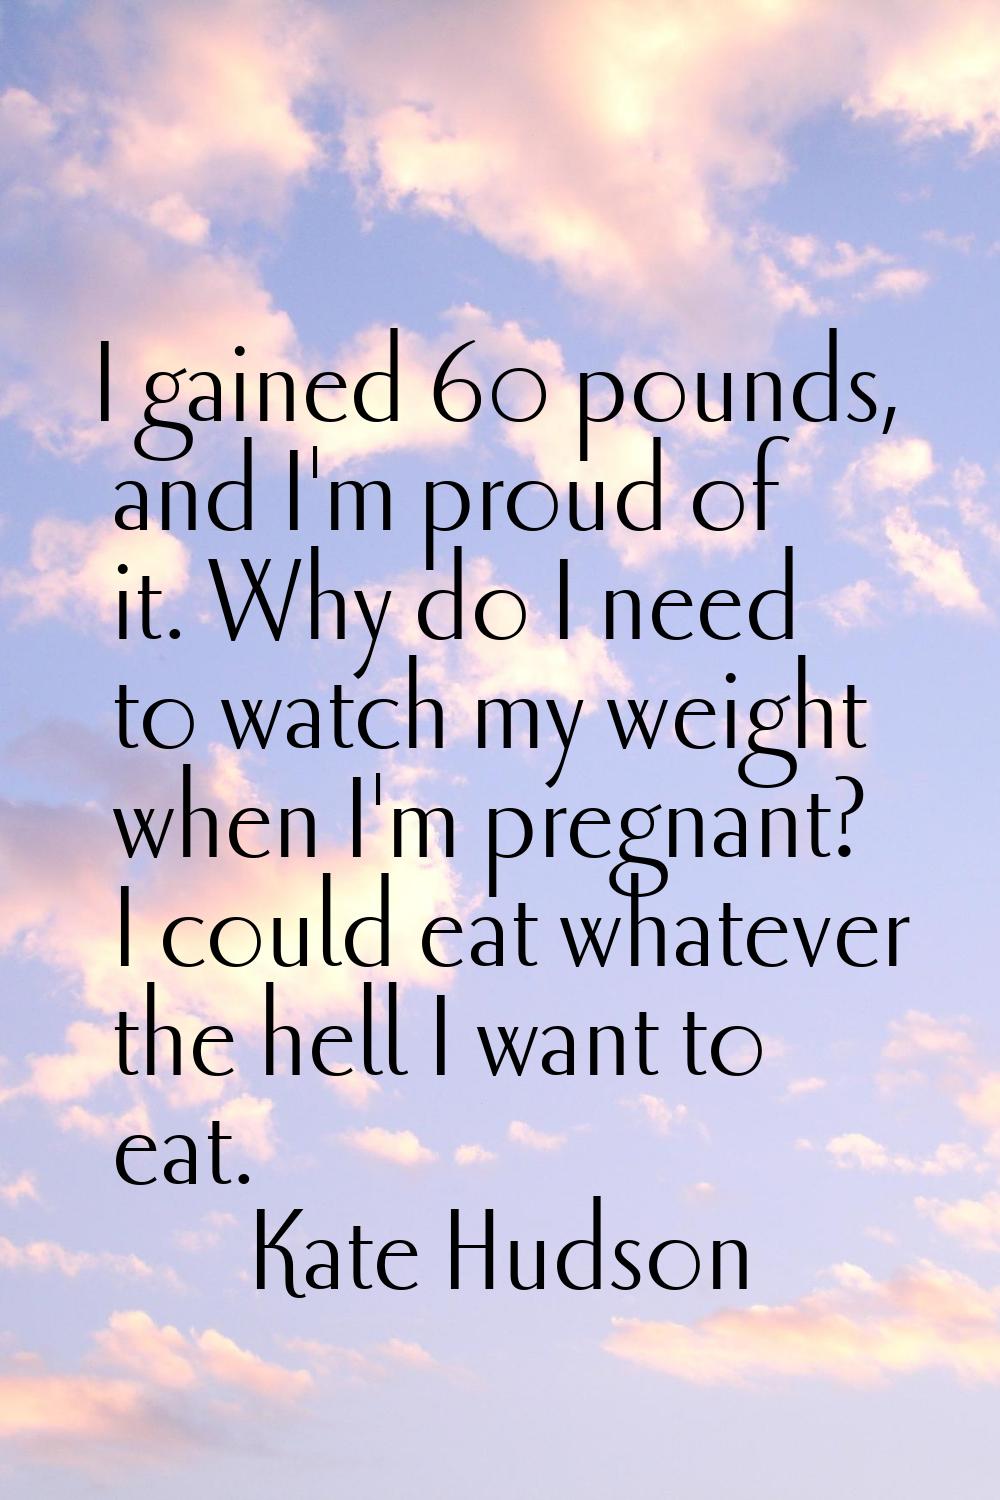 I gained 60 pounds, and I'm proud of it. Why do I need to watch my weight when I'm pregnant? I coul